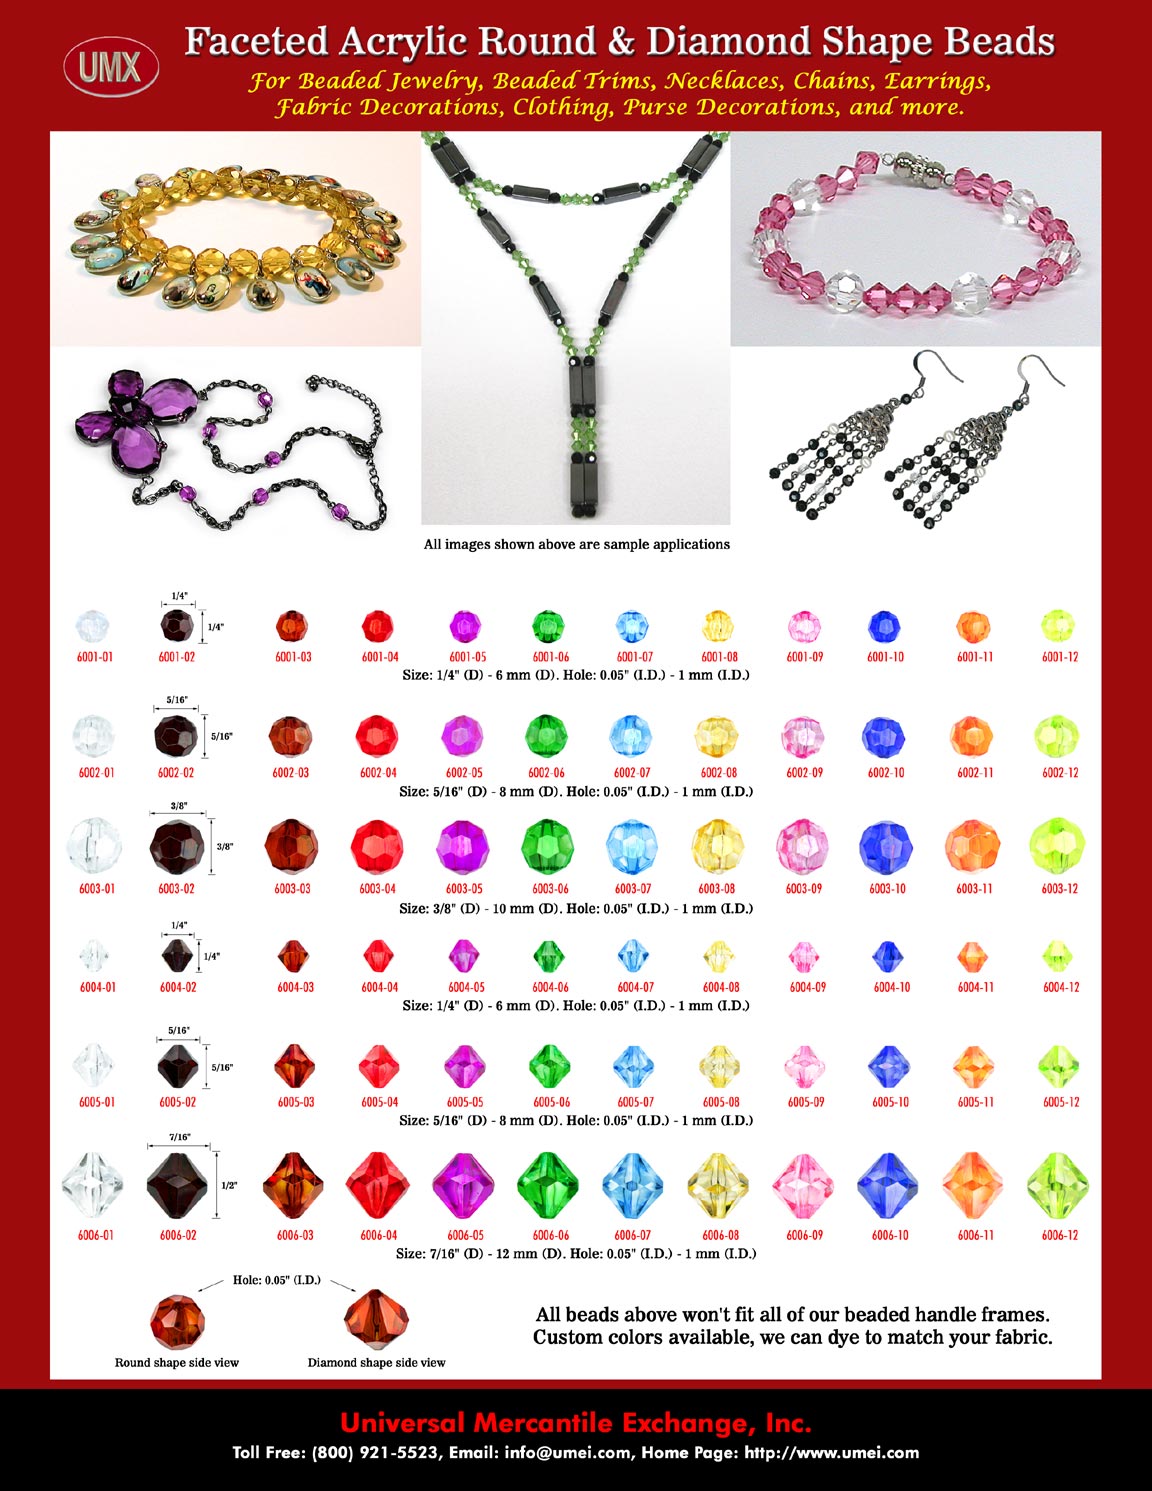 Wholesale Acrylic Beads and Bead Stores.